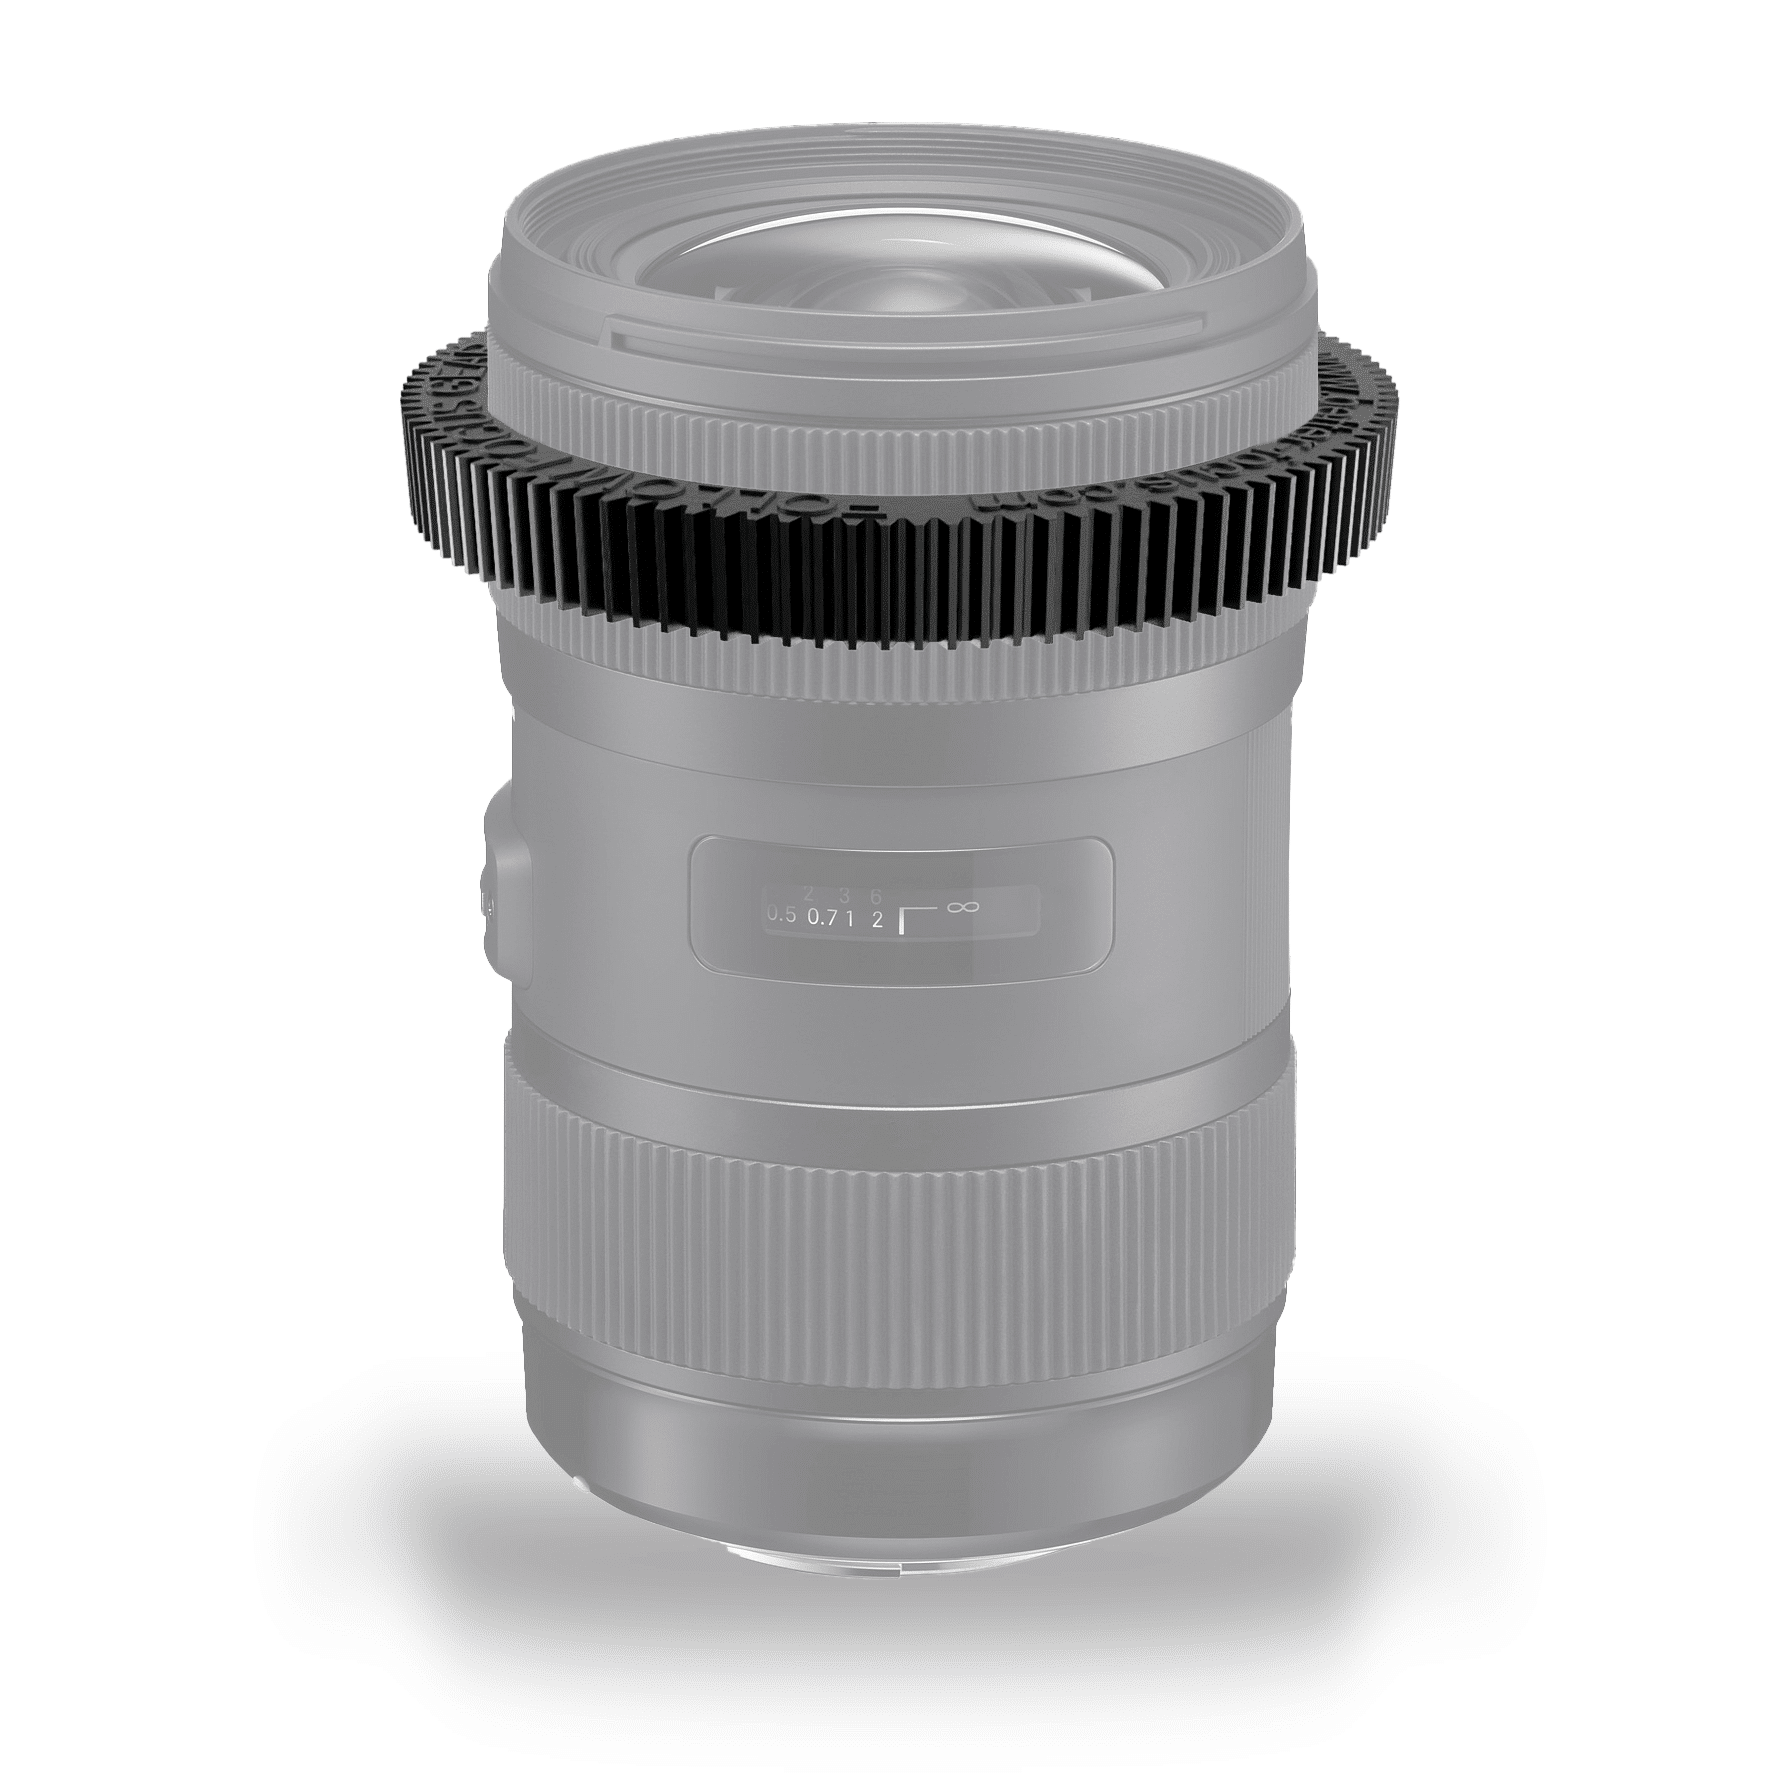 Follow Focus Ring for TAMRON 17-28MM F2.8 DI RXD III (E MOUNT) lens